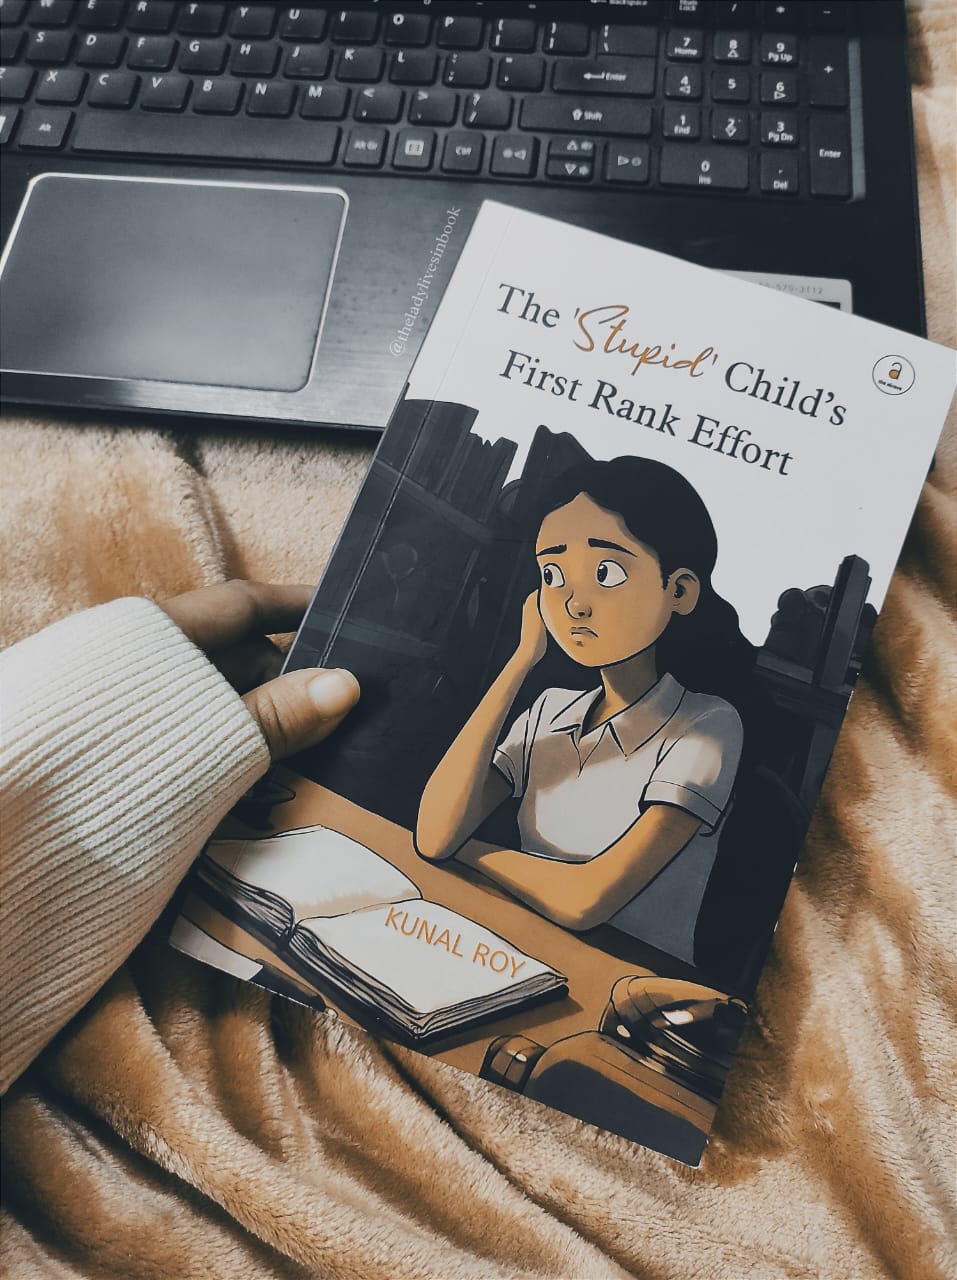 The Stupid Child’s First Rank Effort By Kunal Roy does an excellent job on talking about learning difficulties – Book Review